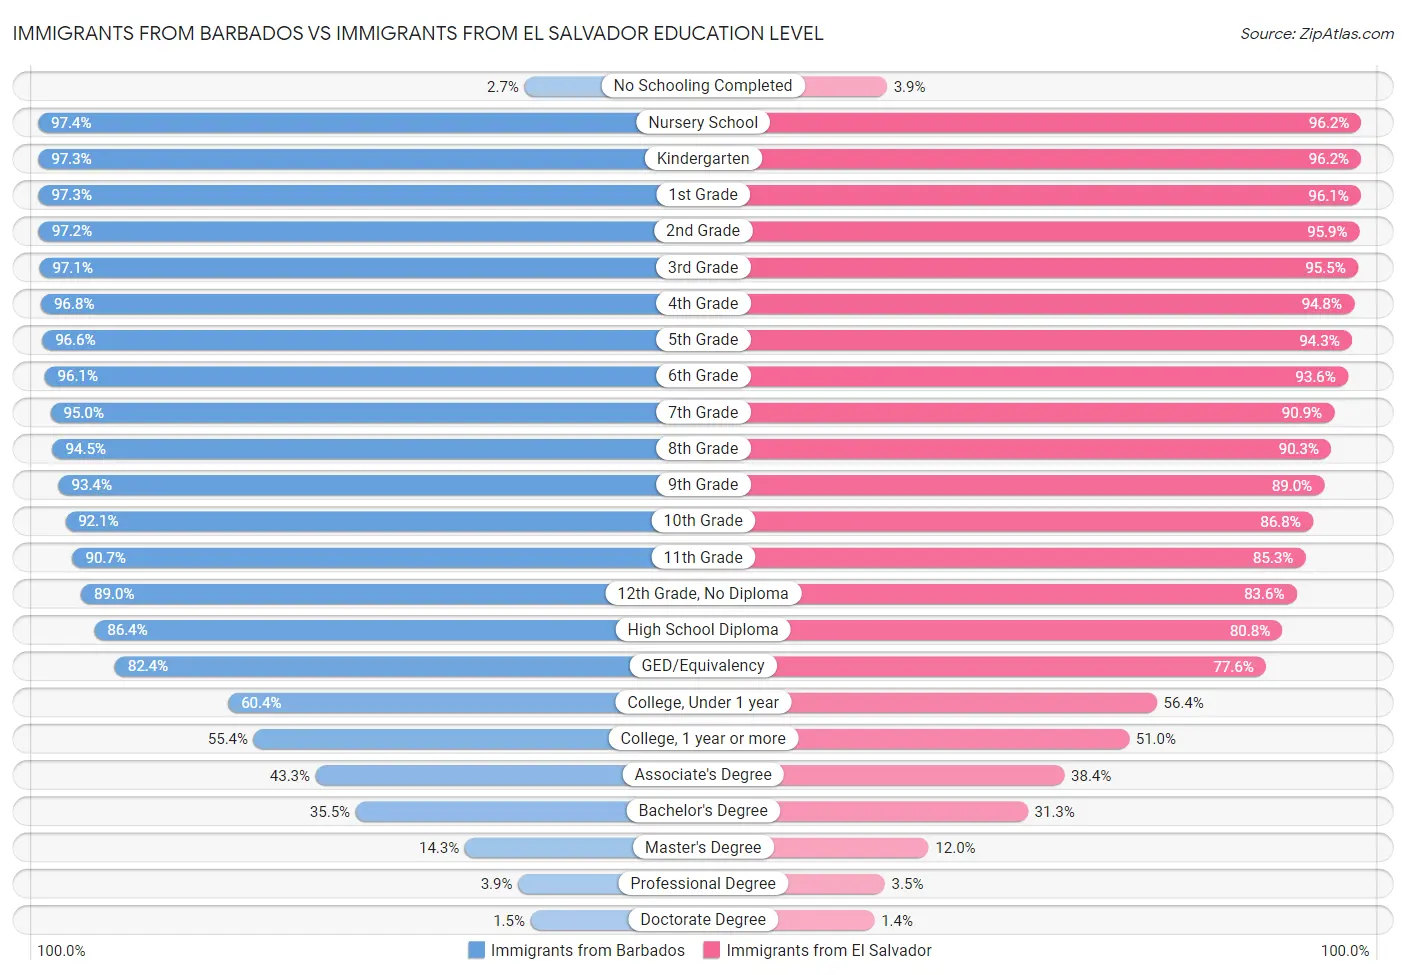 Immigrants from Barbados vs Immigrants from El Salvador Education Level